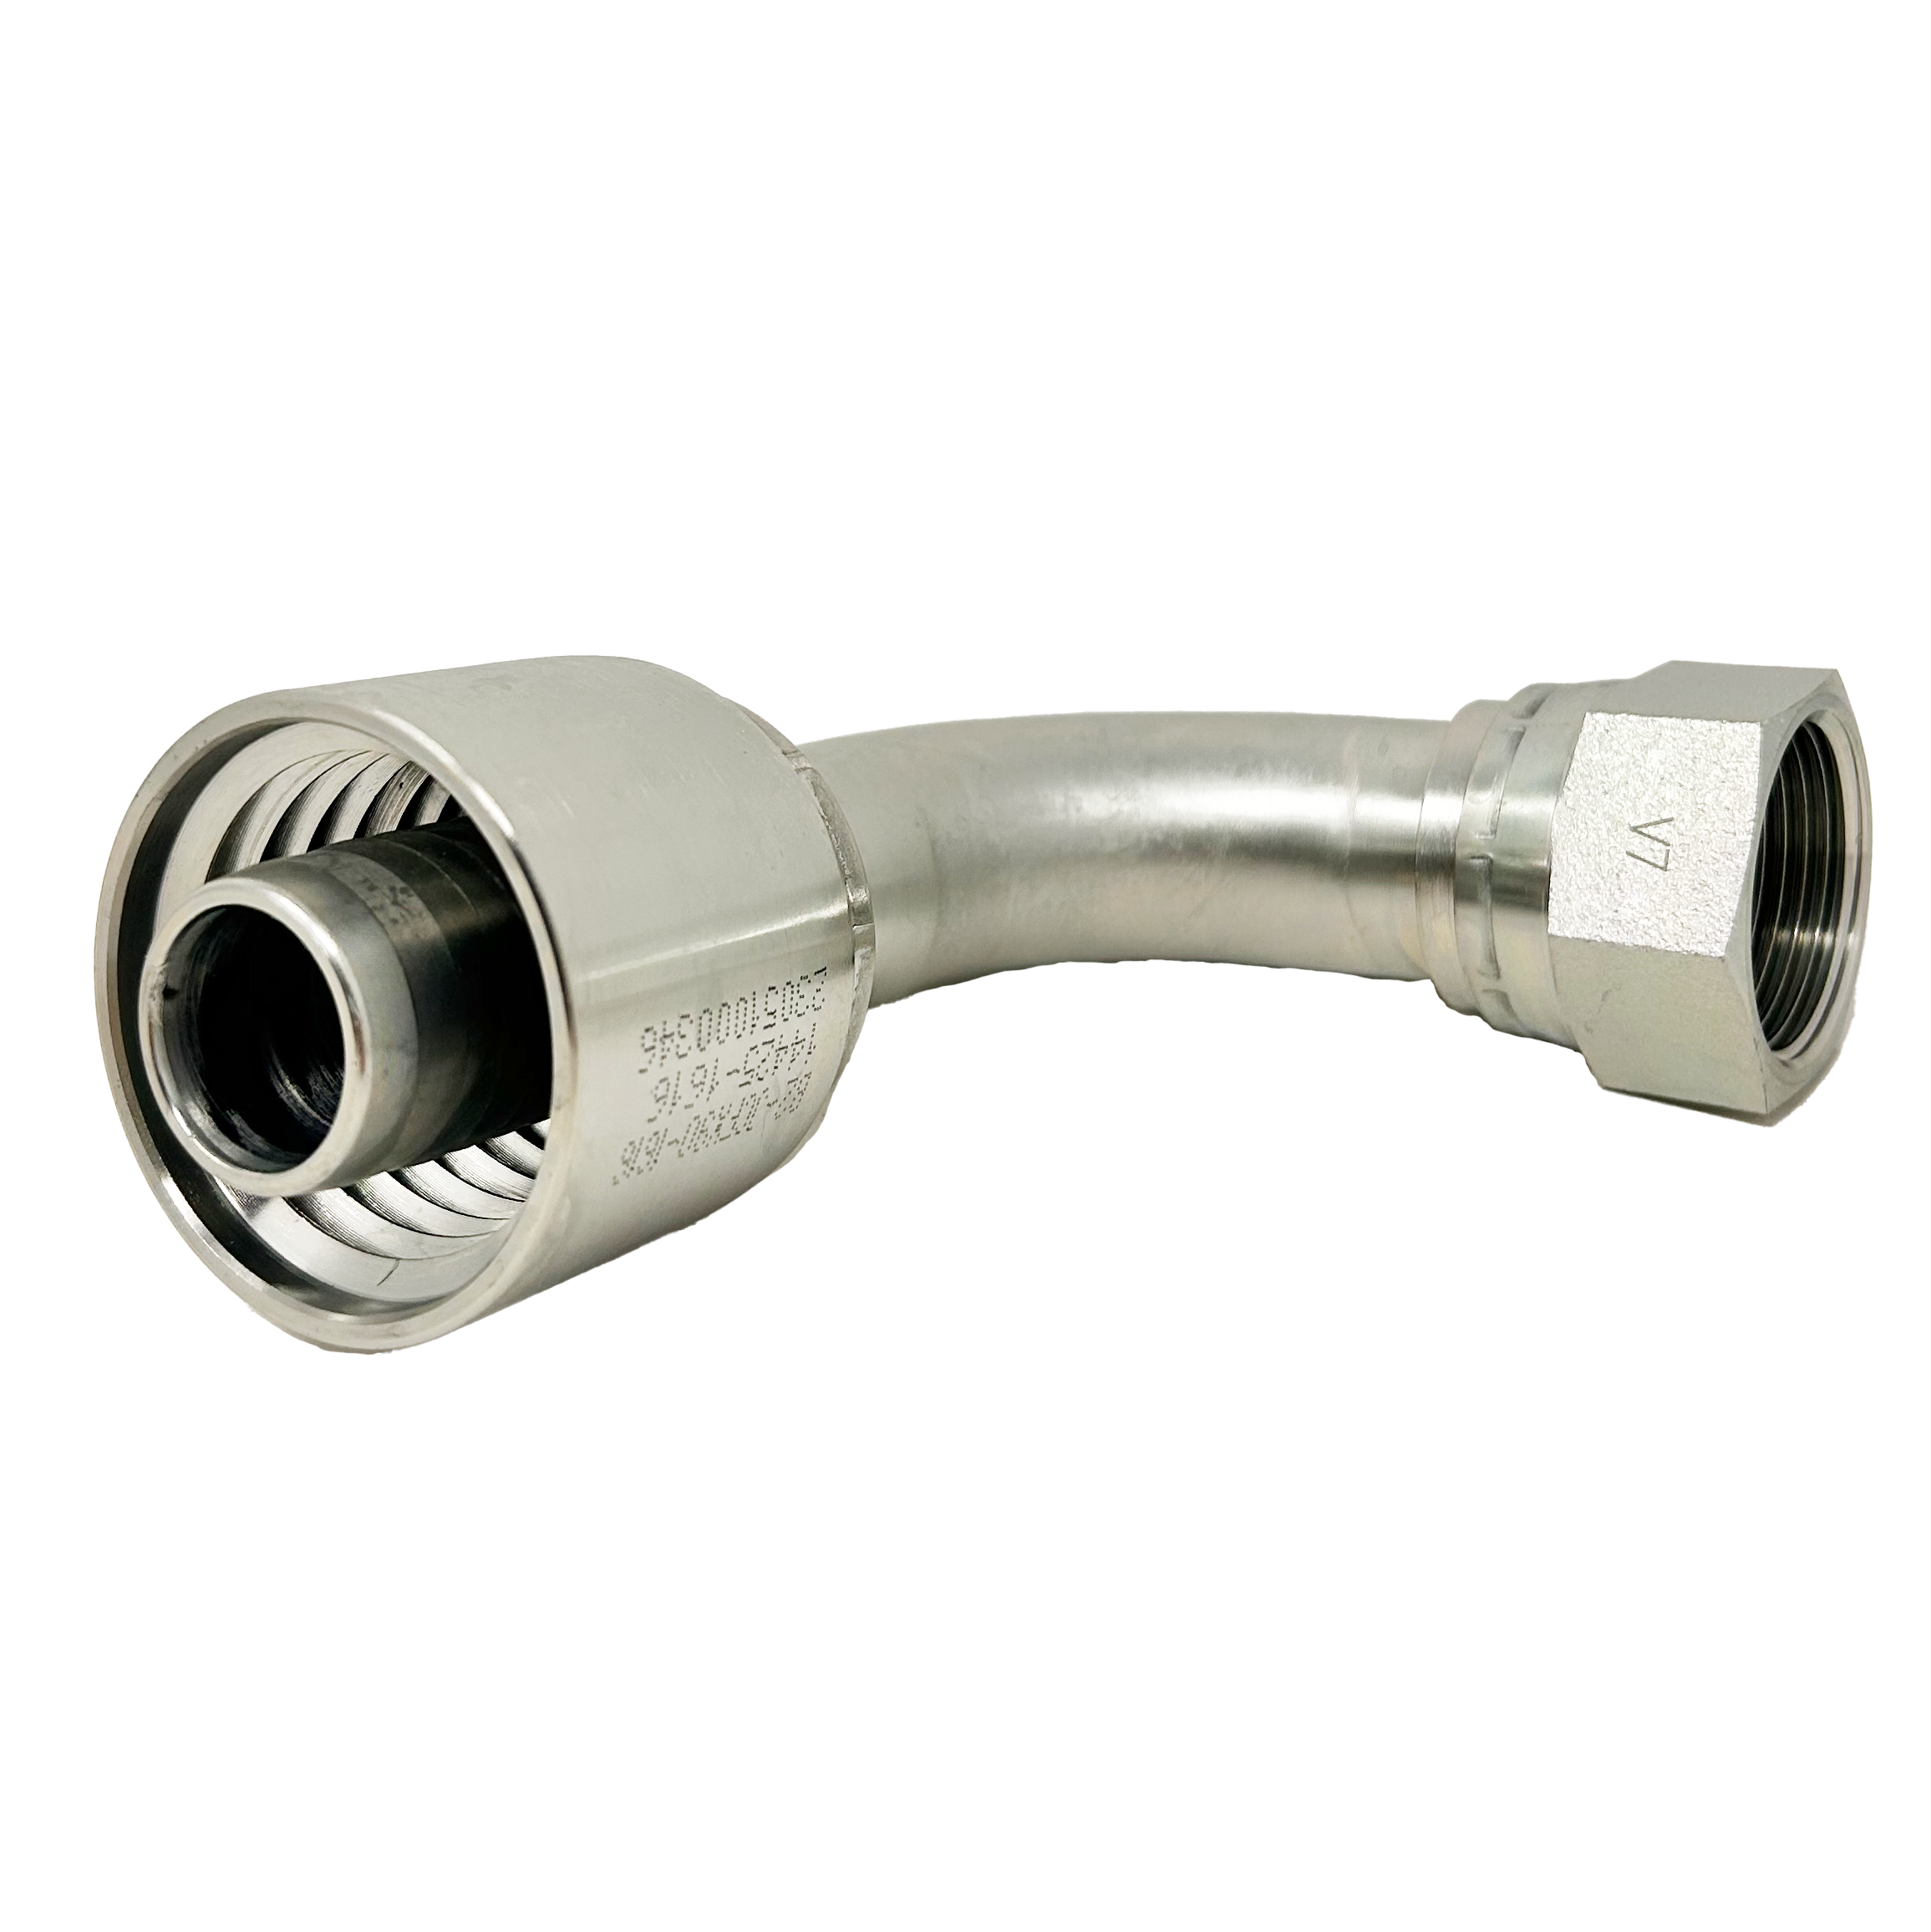 B2-JCFX90-1010: Continental Hose Fitting, 0.625 (5/8") Hose ID x 7/8-14 Female JIC, 90-Degree Swivel Connection